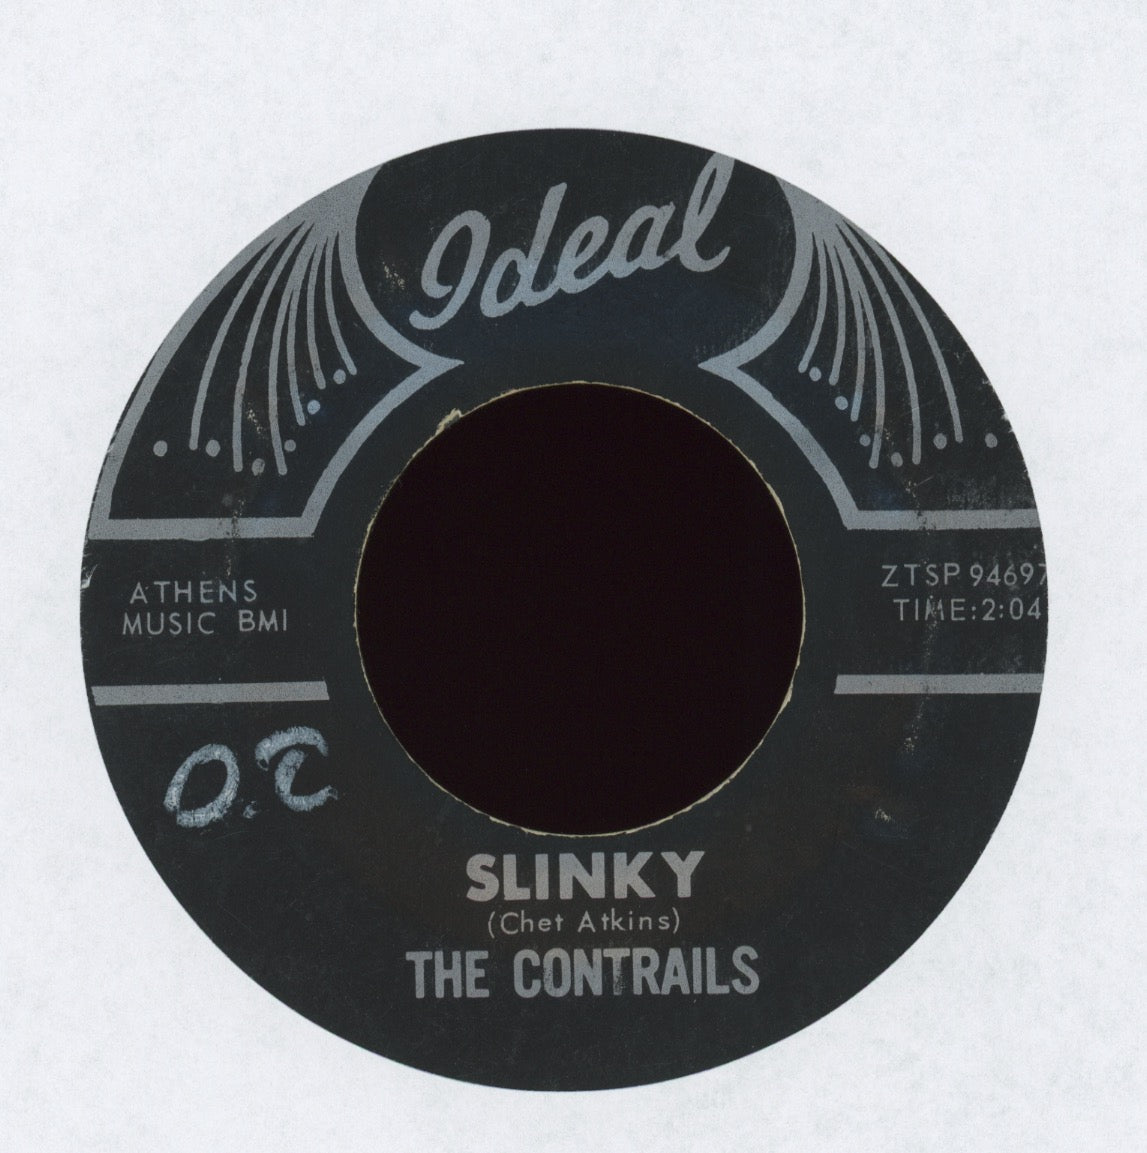 The Contrails - Contrails / Slinky on Ideal